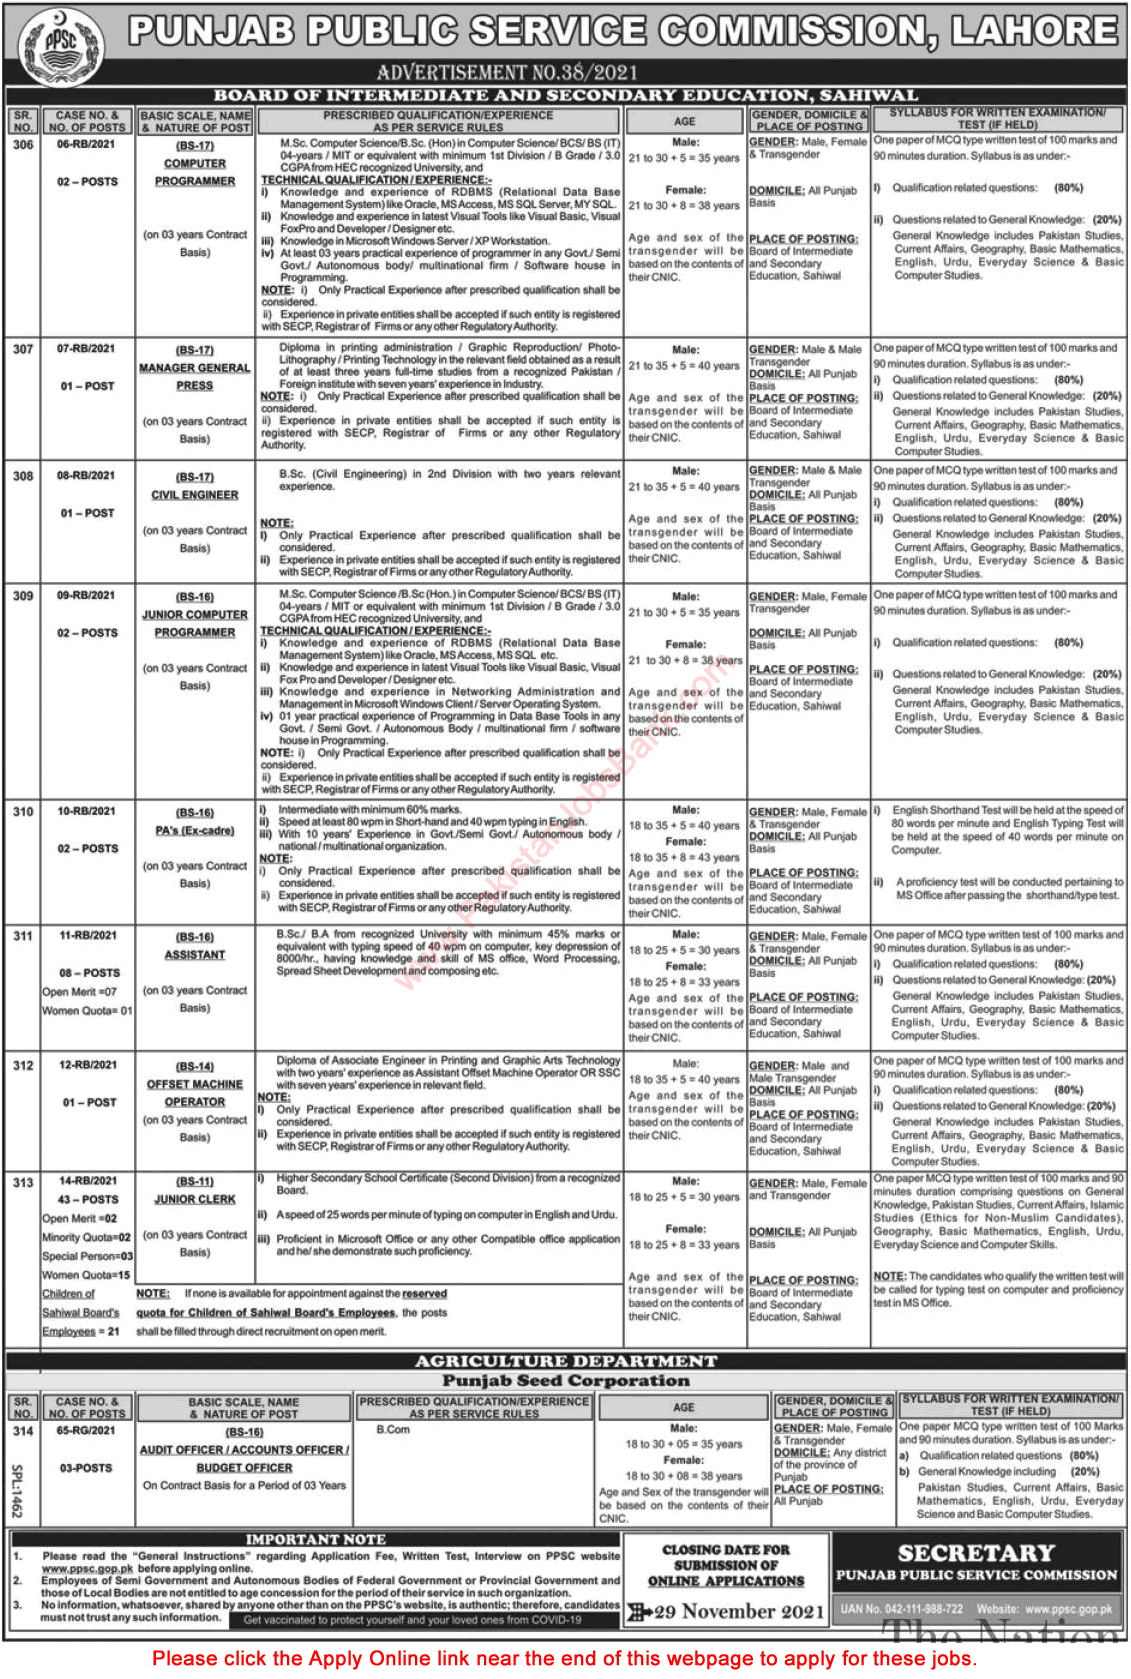 PPSC Jobs November 2021 Apply Online Consolidated Advertisement No 38/2021 Latest